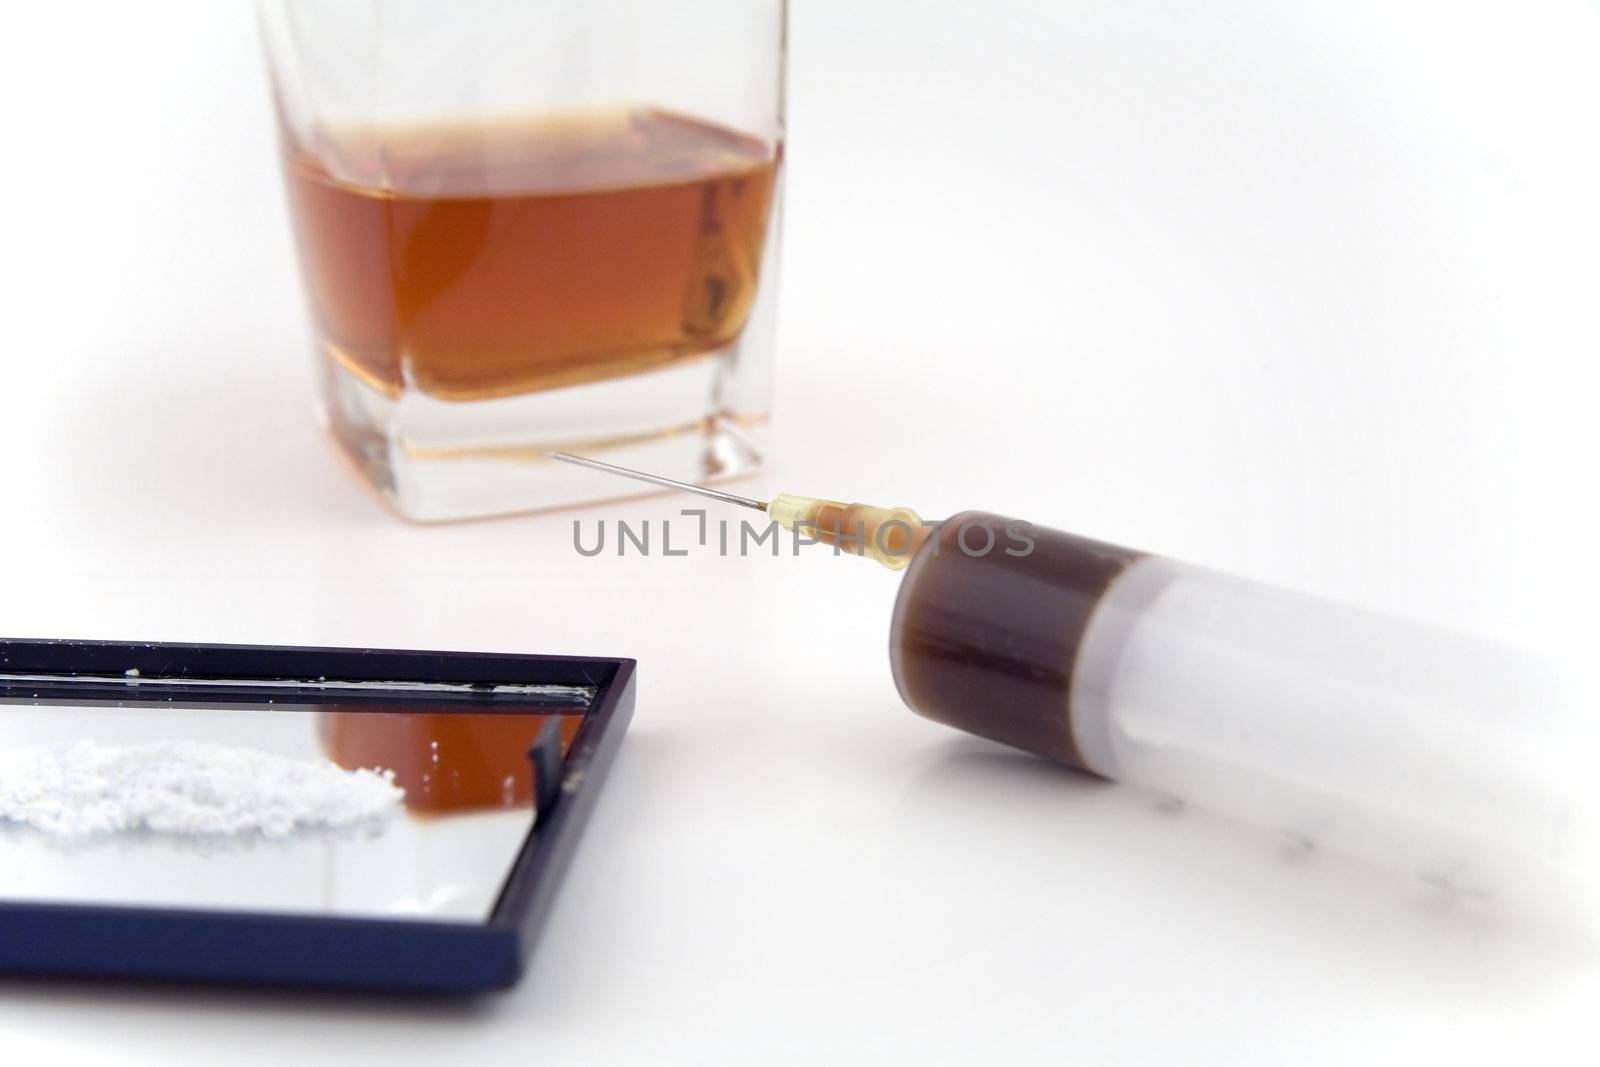 syringe, cocaine and a glass of whiskey